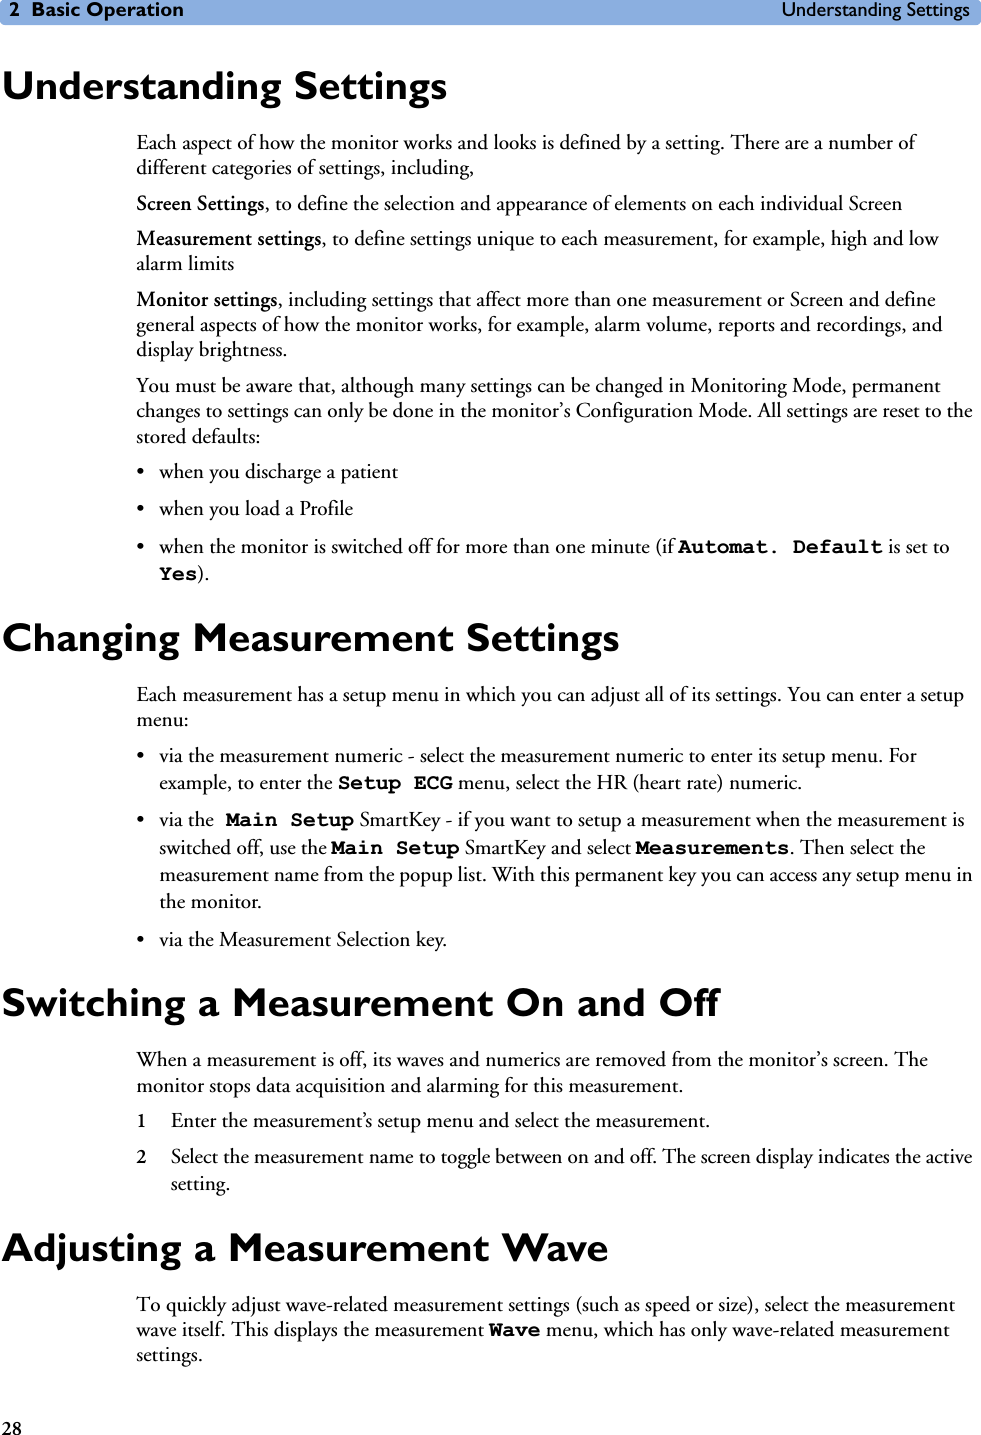 2 Basic Operation Understanding Settings28Understanding SettingsEach aspect of how the monitor works and looks is defined by a setting. There are a number of different categories of settings, including,Screen Settings, to define the selection and appearance of elements on each individual ScreenMeasurement settings, to define settings unique to each measurement, for example, high and low alarm limitsMonitor settings, including settings that affect more than one measurement or Screen and define general aspects of how the monitor works, for example, alarm volume, reports and recordings, and display brightness.You must be aware that, although many settings can be changed in Monitoring Mode, permanent changes to settings can only be done in the monitor’s Configuration Mode. All settings are reset to the stored defaults: • when you discharge a patient • when you load a Profile• when the monitor is switched off for more than one minute (if Automat. Default is set to Yes).Changing Measurement SettingsEach measurement has a setup menu in which you can adjust all of its settings. You can enter a setup menu:• via the measurement numeric - select the measurement numeric to enter its setup menu. For example, to enter the Setup ECG menu, select the HR (heart rate) numeric.•via the Main Setup SmartKey - if you want to setup a measurement when the measurement is switched off, use the Main Setup SmartKey and select Measurements. Then select the measurement name from the popup list. With this permanent key you can access any setup menu in the monitor.• via the Measurement Selection key.Switching a Measurement On and OffWhen a measurement is off, its waves and numerics are removed from the monitor’s screen. The monitor stops data acquisition and alarming for this measurement. 1Enter the measurement’s setup menu and select the measurement.2Select the measurement name to toggle between on and off. The screen display indicates the active setting.Adjusting a Measurement WaveTo quickly adjust wave-related measurement settings (such as speed or size), select the measurement wave itself. This displays the measurement Wave menu, which has only wave-related measurement settings.